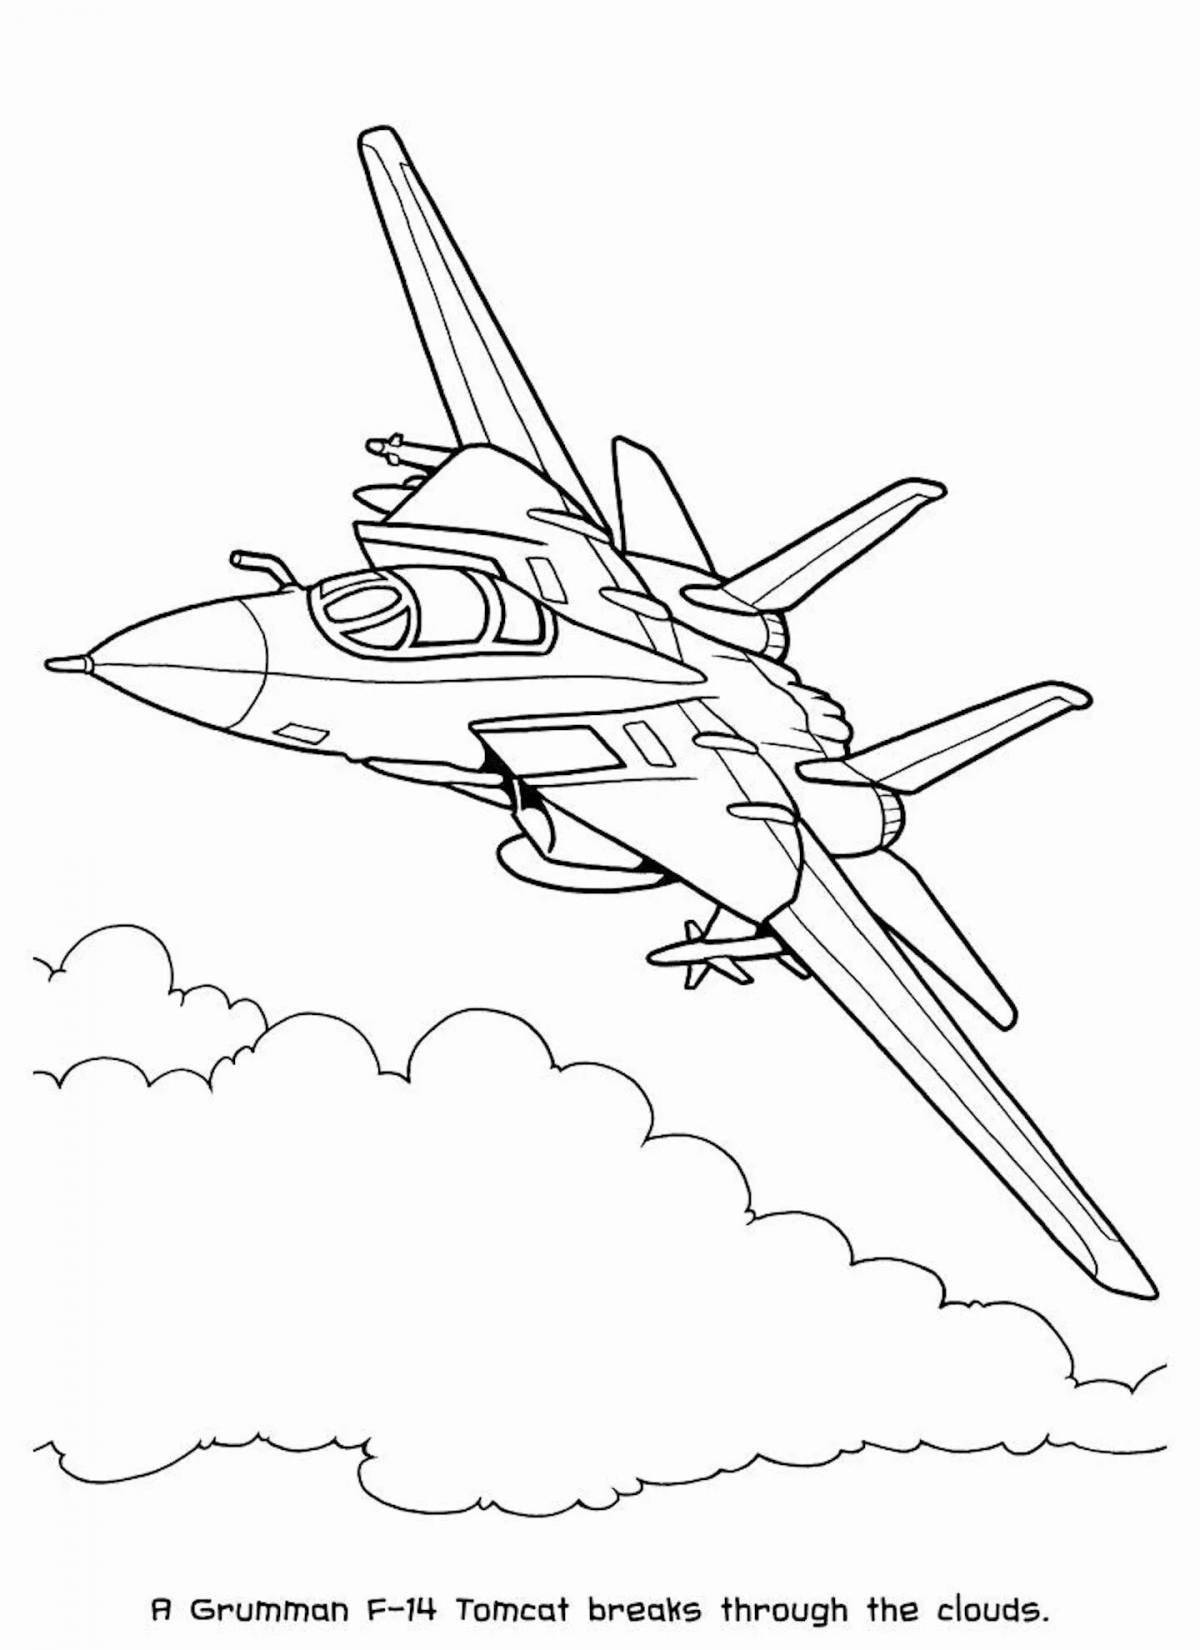 Coloring page with shock fighter for children 5-6 years old